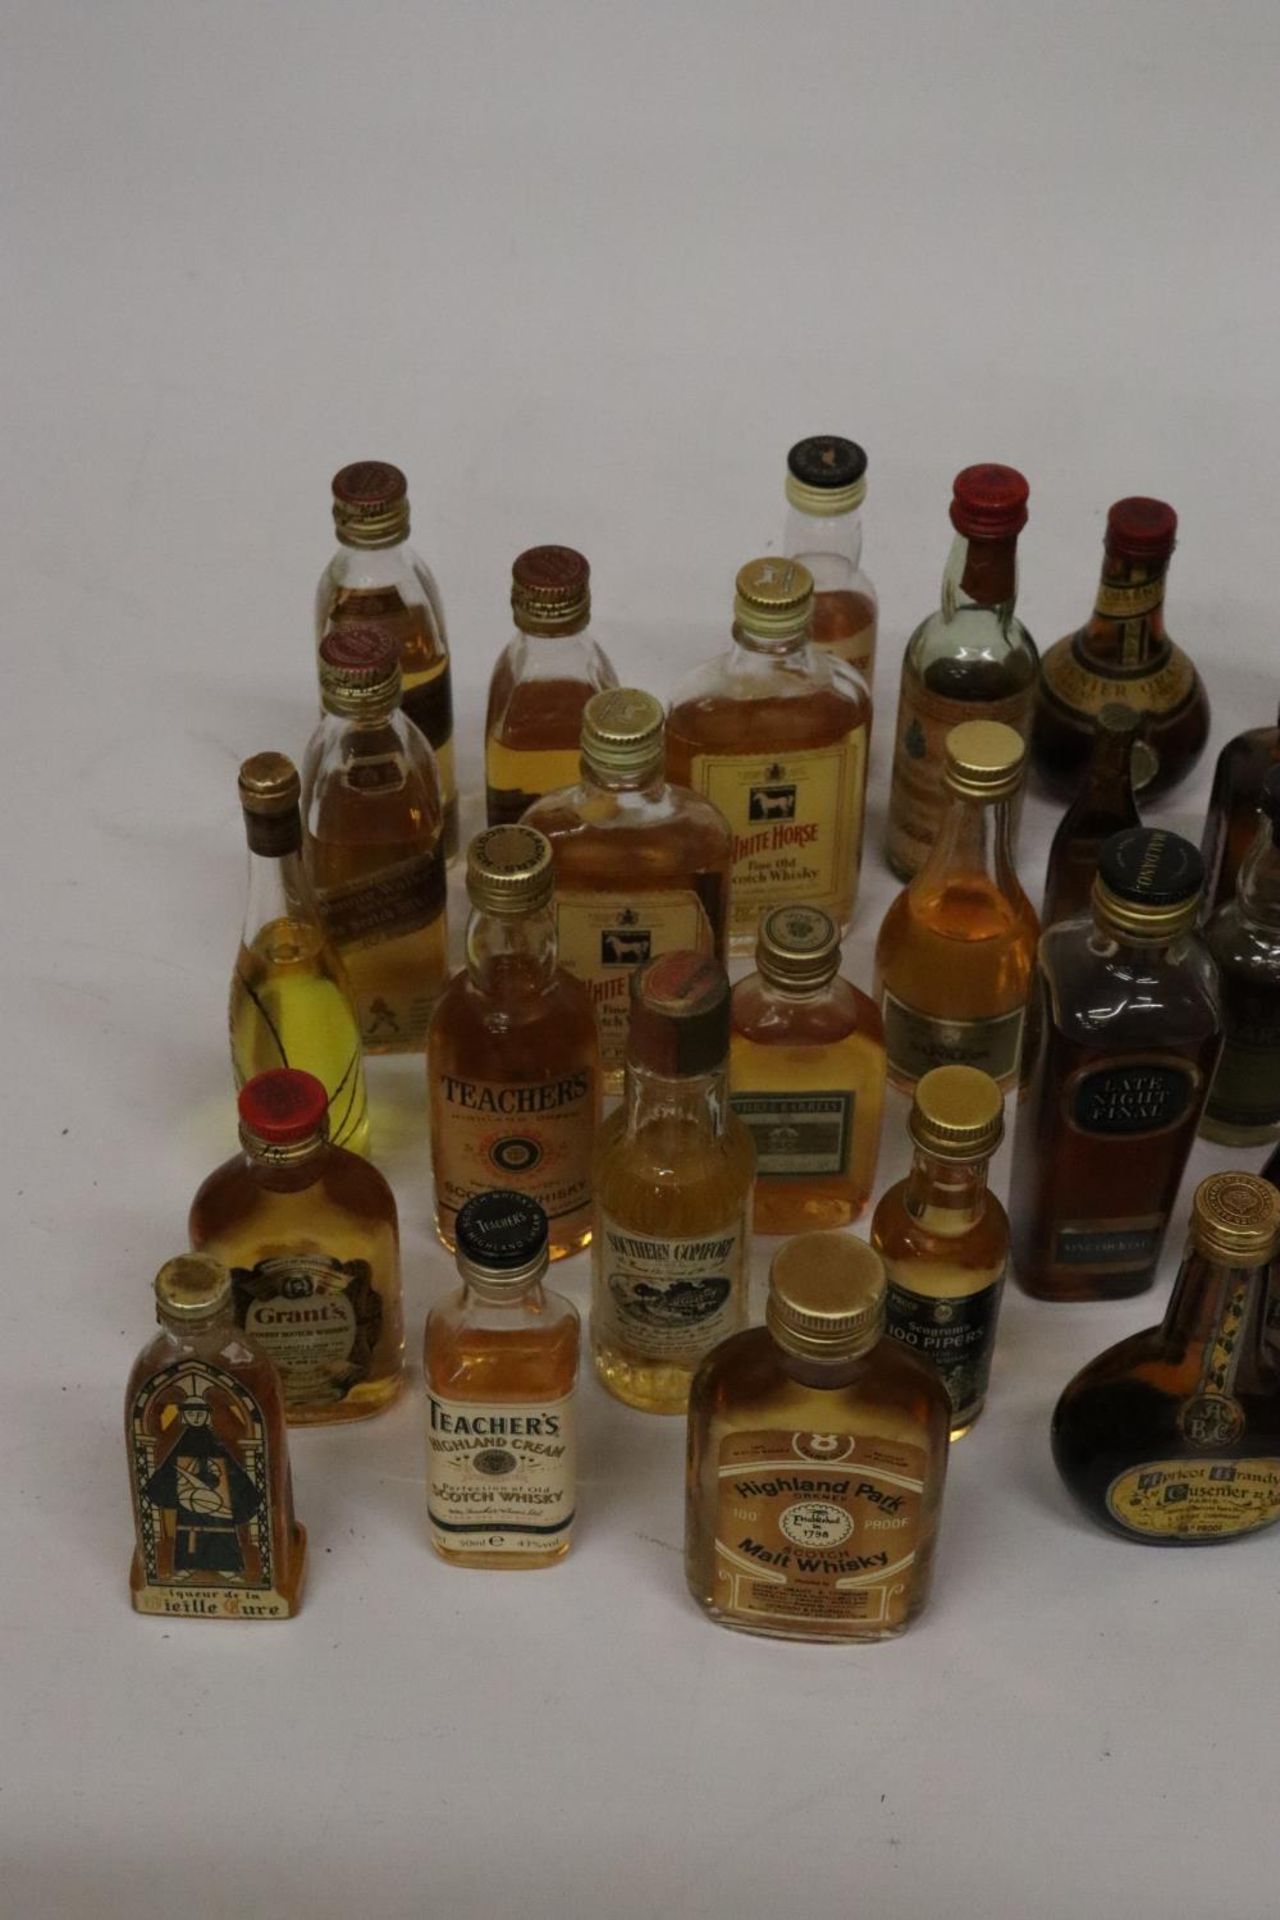 A LARGE QUANTITY OF MINIATURE BOTTLES OF ALCOHOL - Image 3 of 10